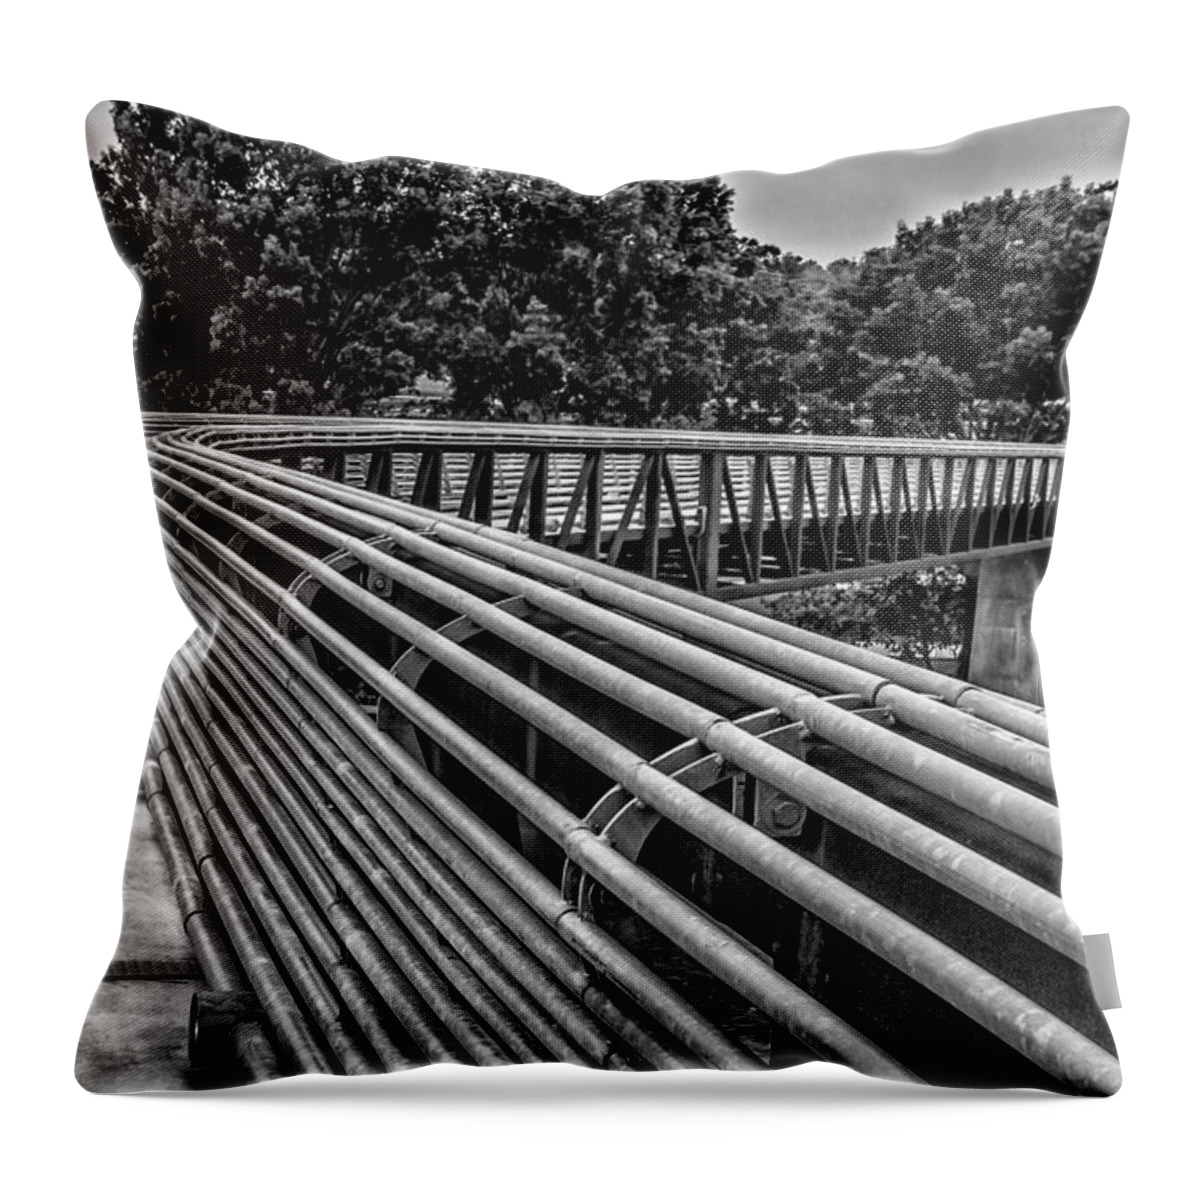 Velocity Throw Pillow featuring the photograph Velocity by James Woody